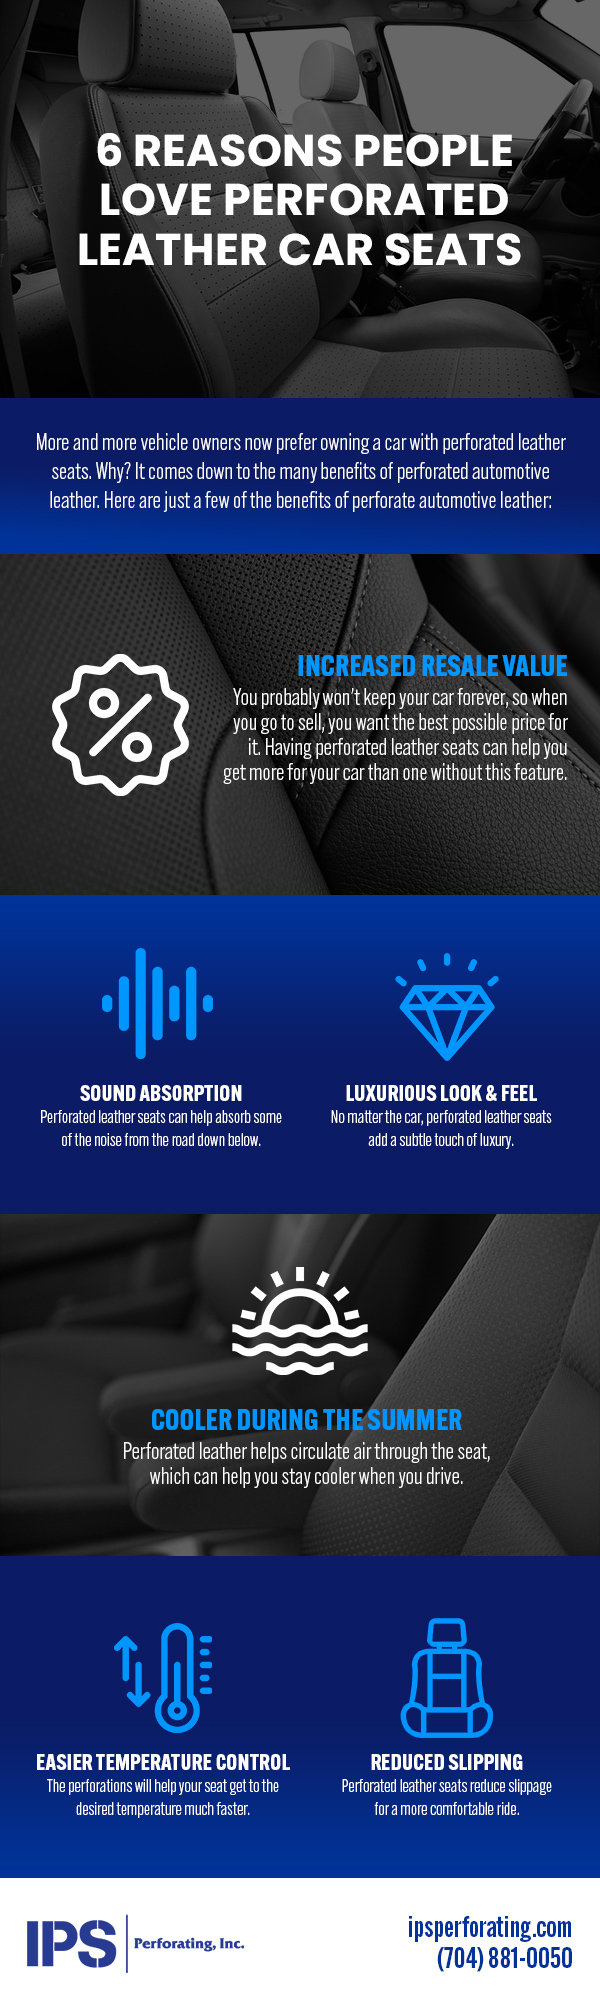 6 Reasons People Love Perforated Leather Car Seats [infographic]